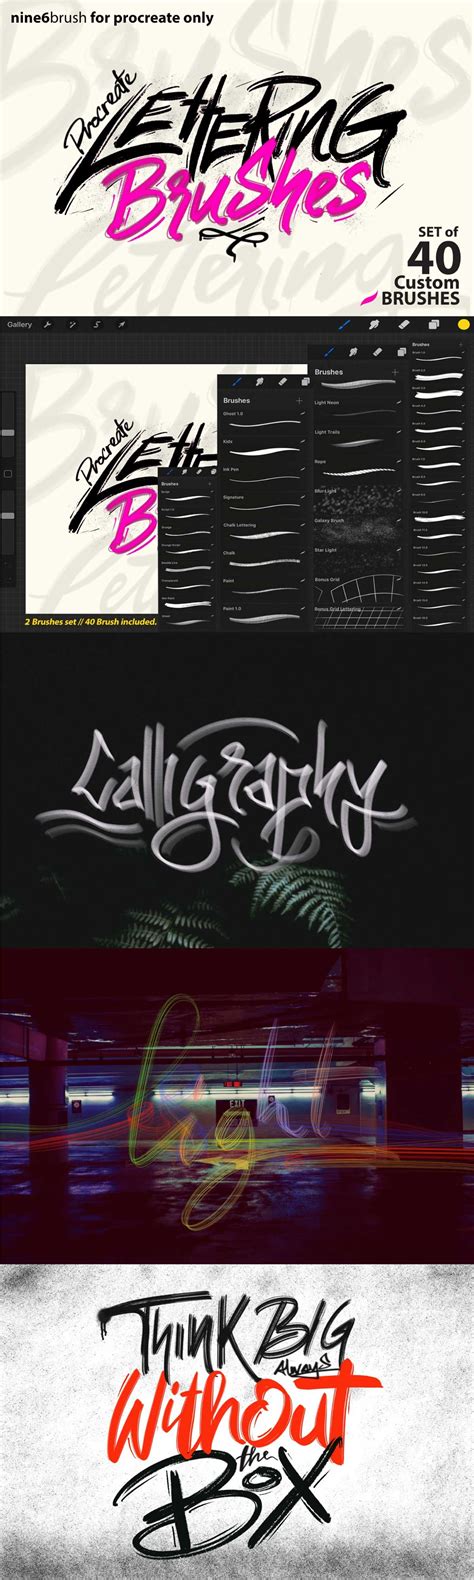 Free Procreate brushes - Ready to download and use now! in 2020 | Procreate lettering, Procreate ...